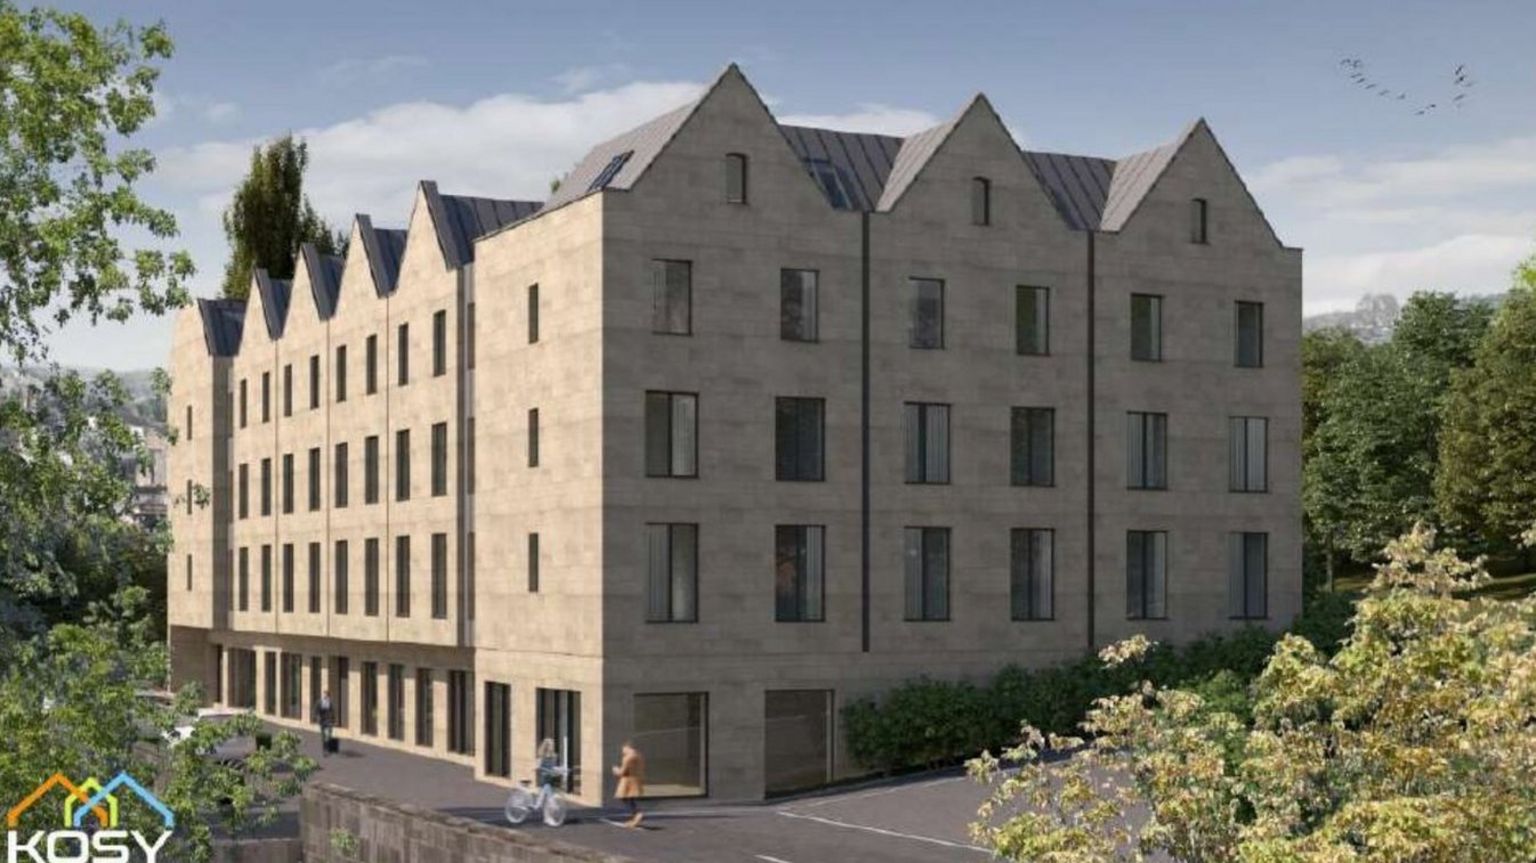 Artist's impression of the proposed new development